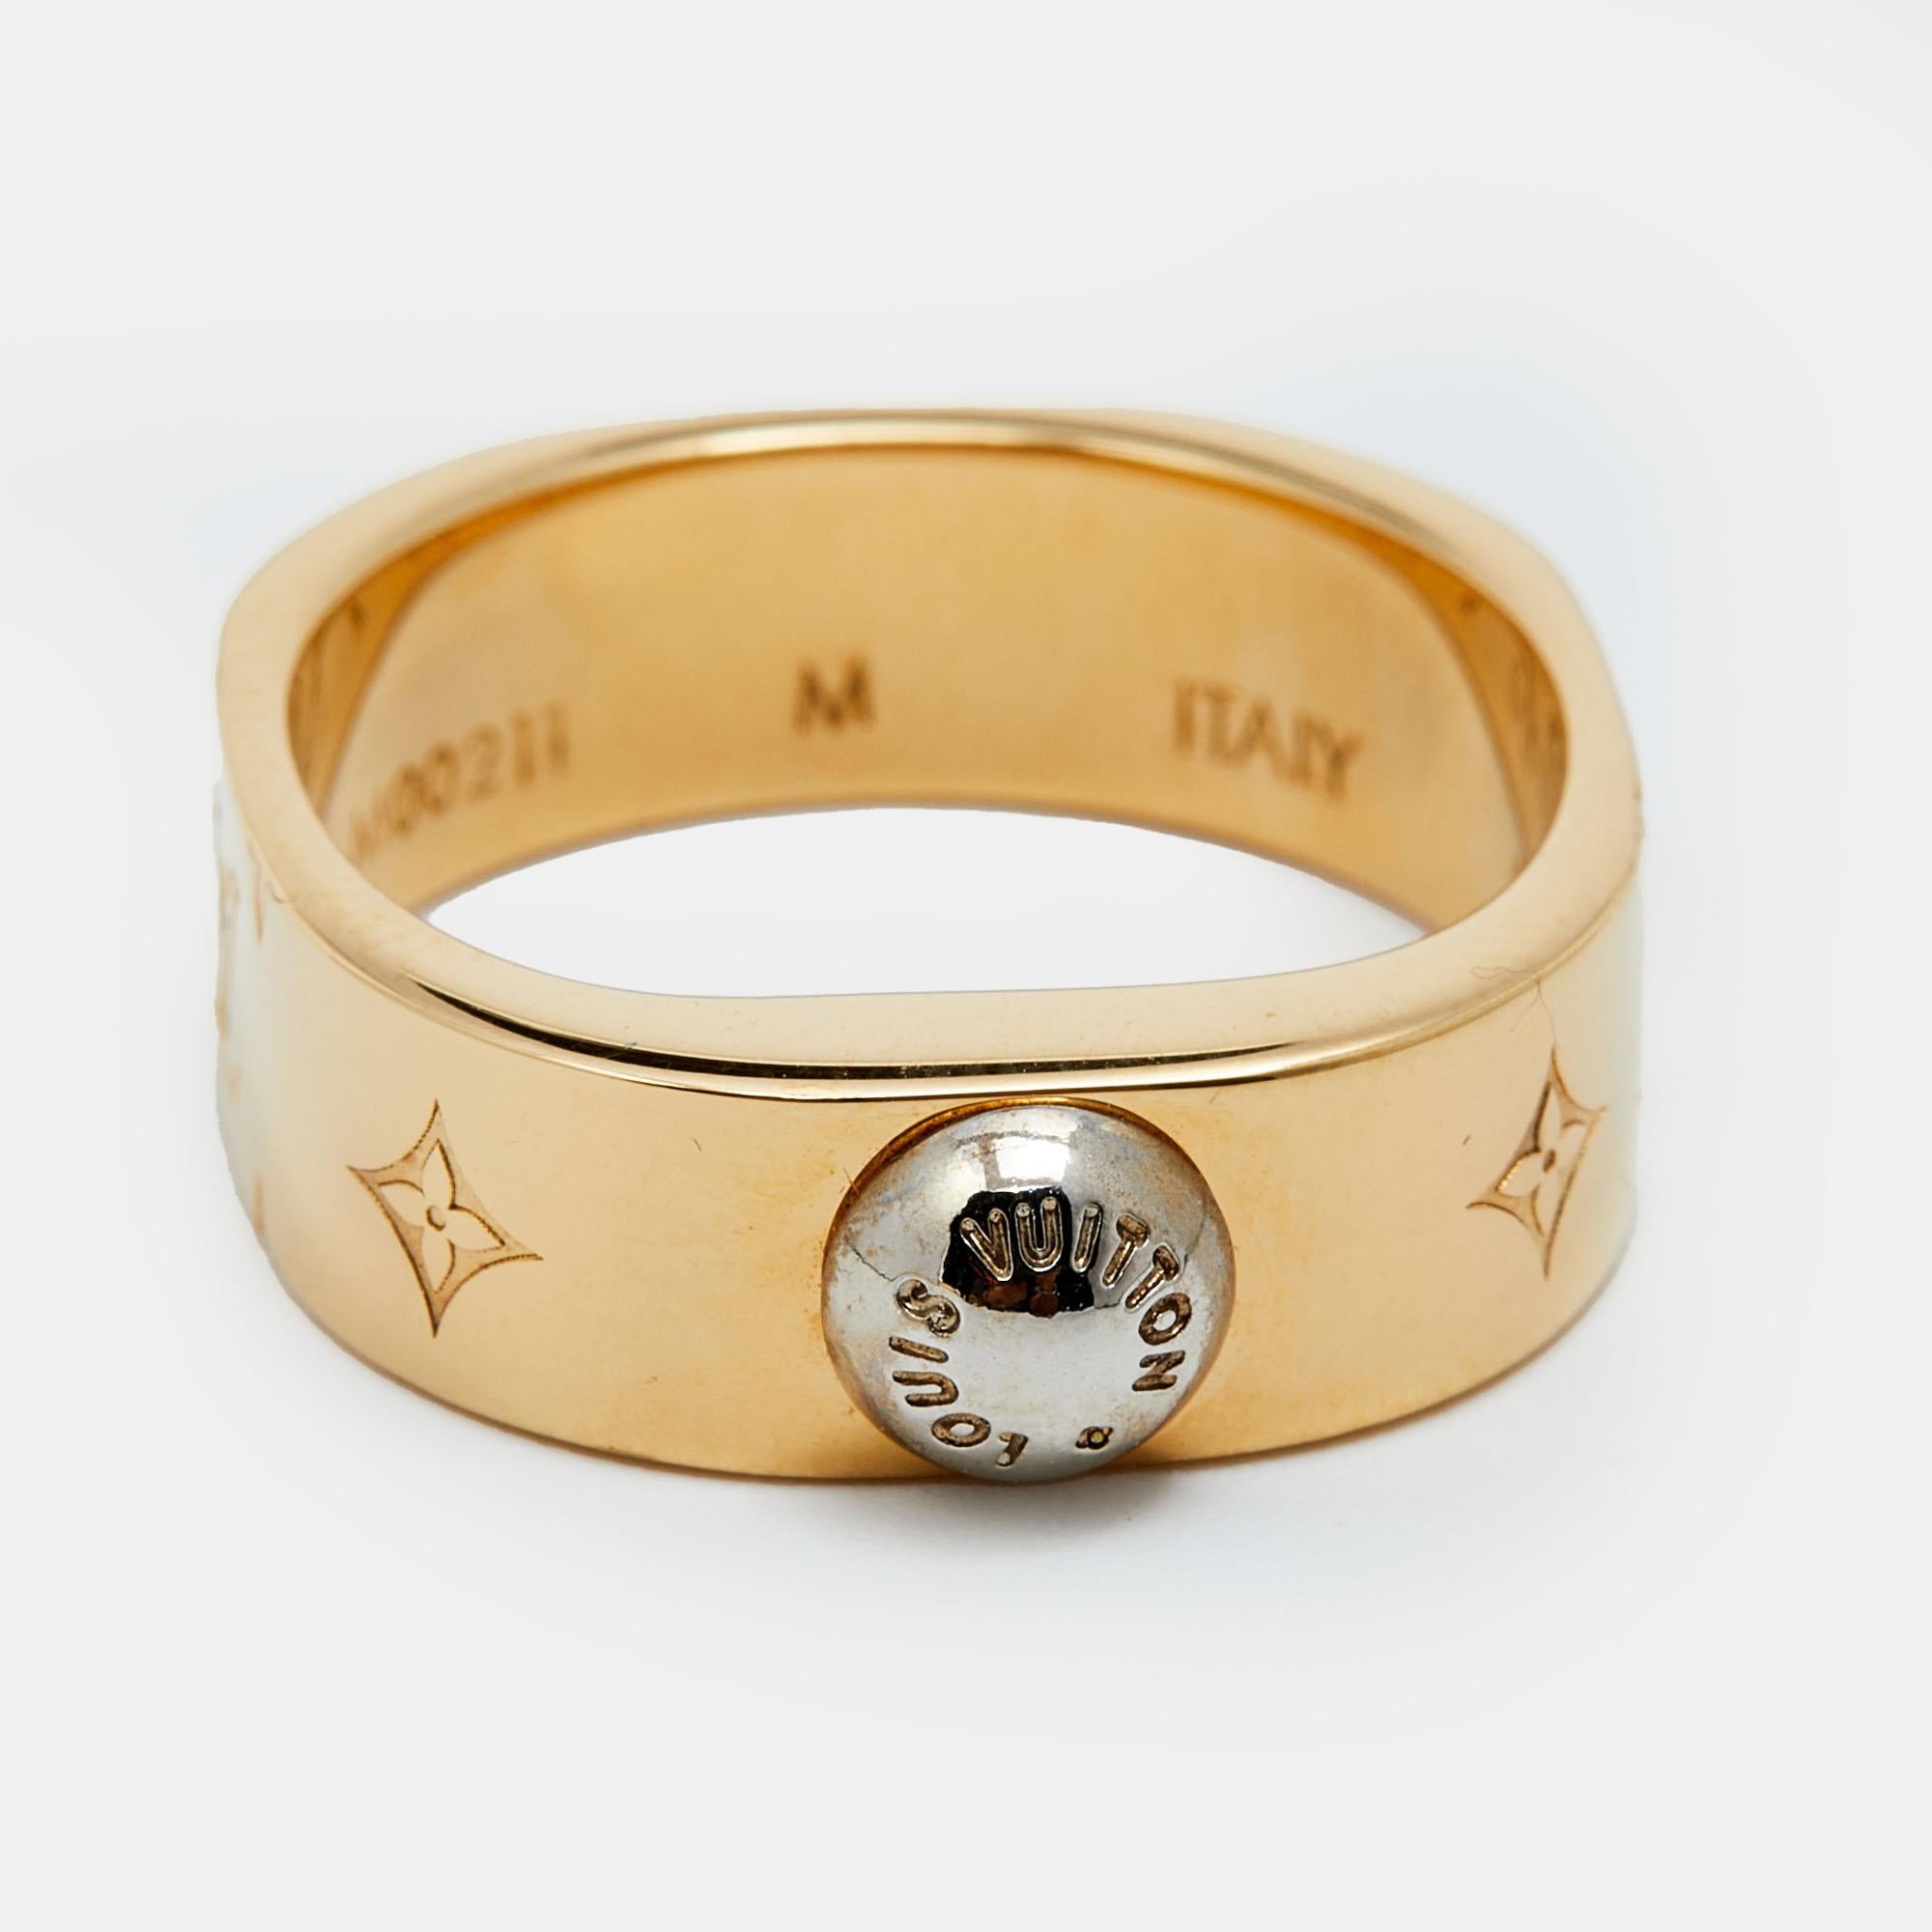 Bound to sit around your finger and exude beauty, this Louis Vuitton is a great buy. It is made from two-tone metal and engraved with its signature motifs, a pattern well-known and loved by fashion lovers around the world. The ring has a smooth